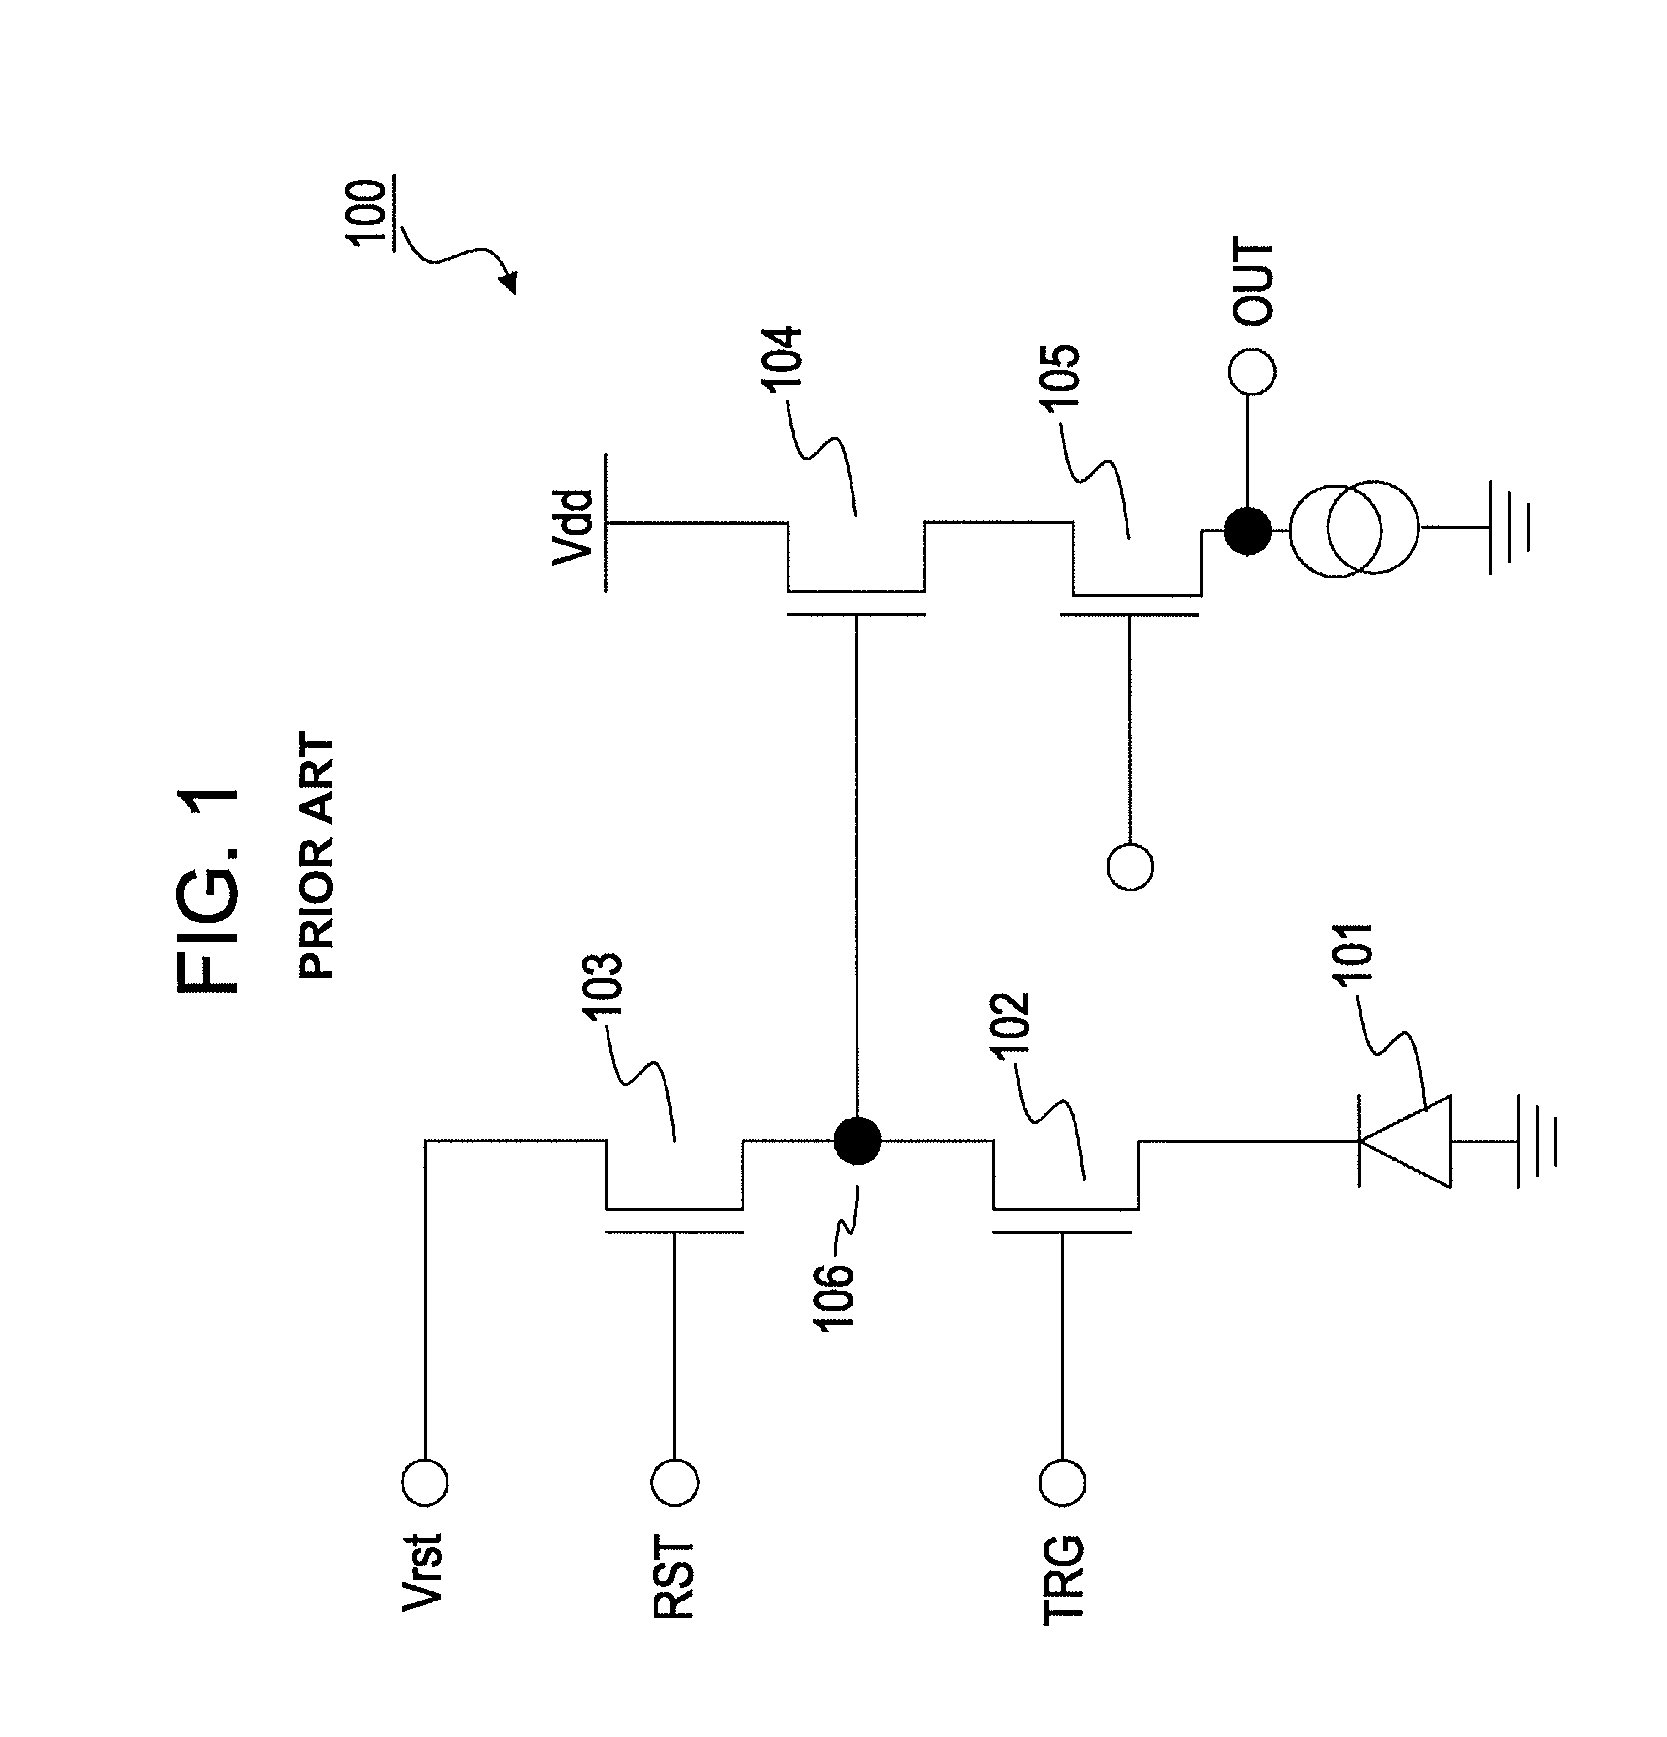 Image processing apparatus, method, and computer program with pixel brightness-change detection and value correction